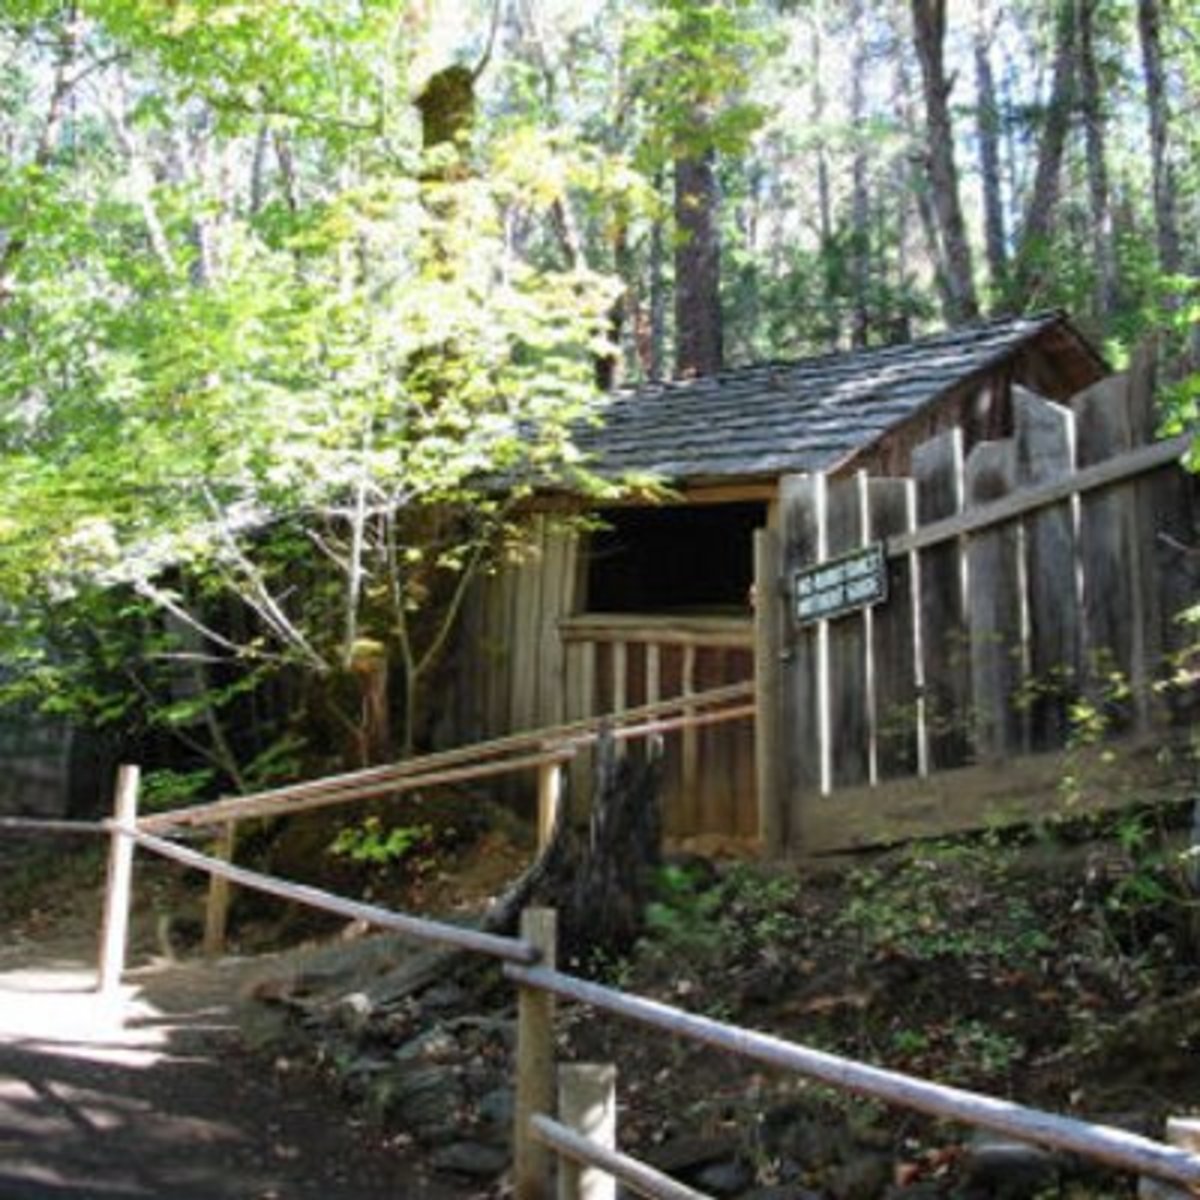 a-place-of-mystery-the-oregon-vortex